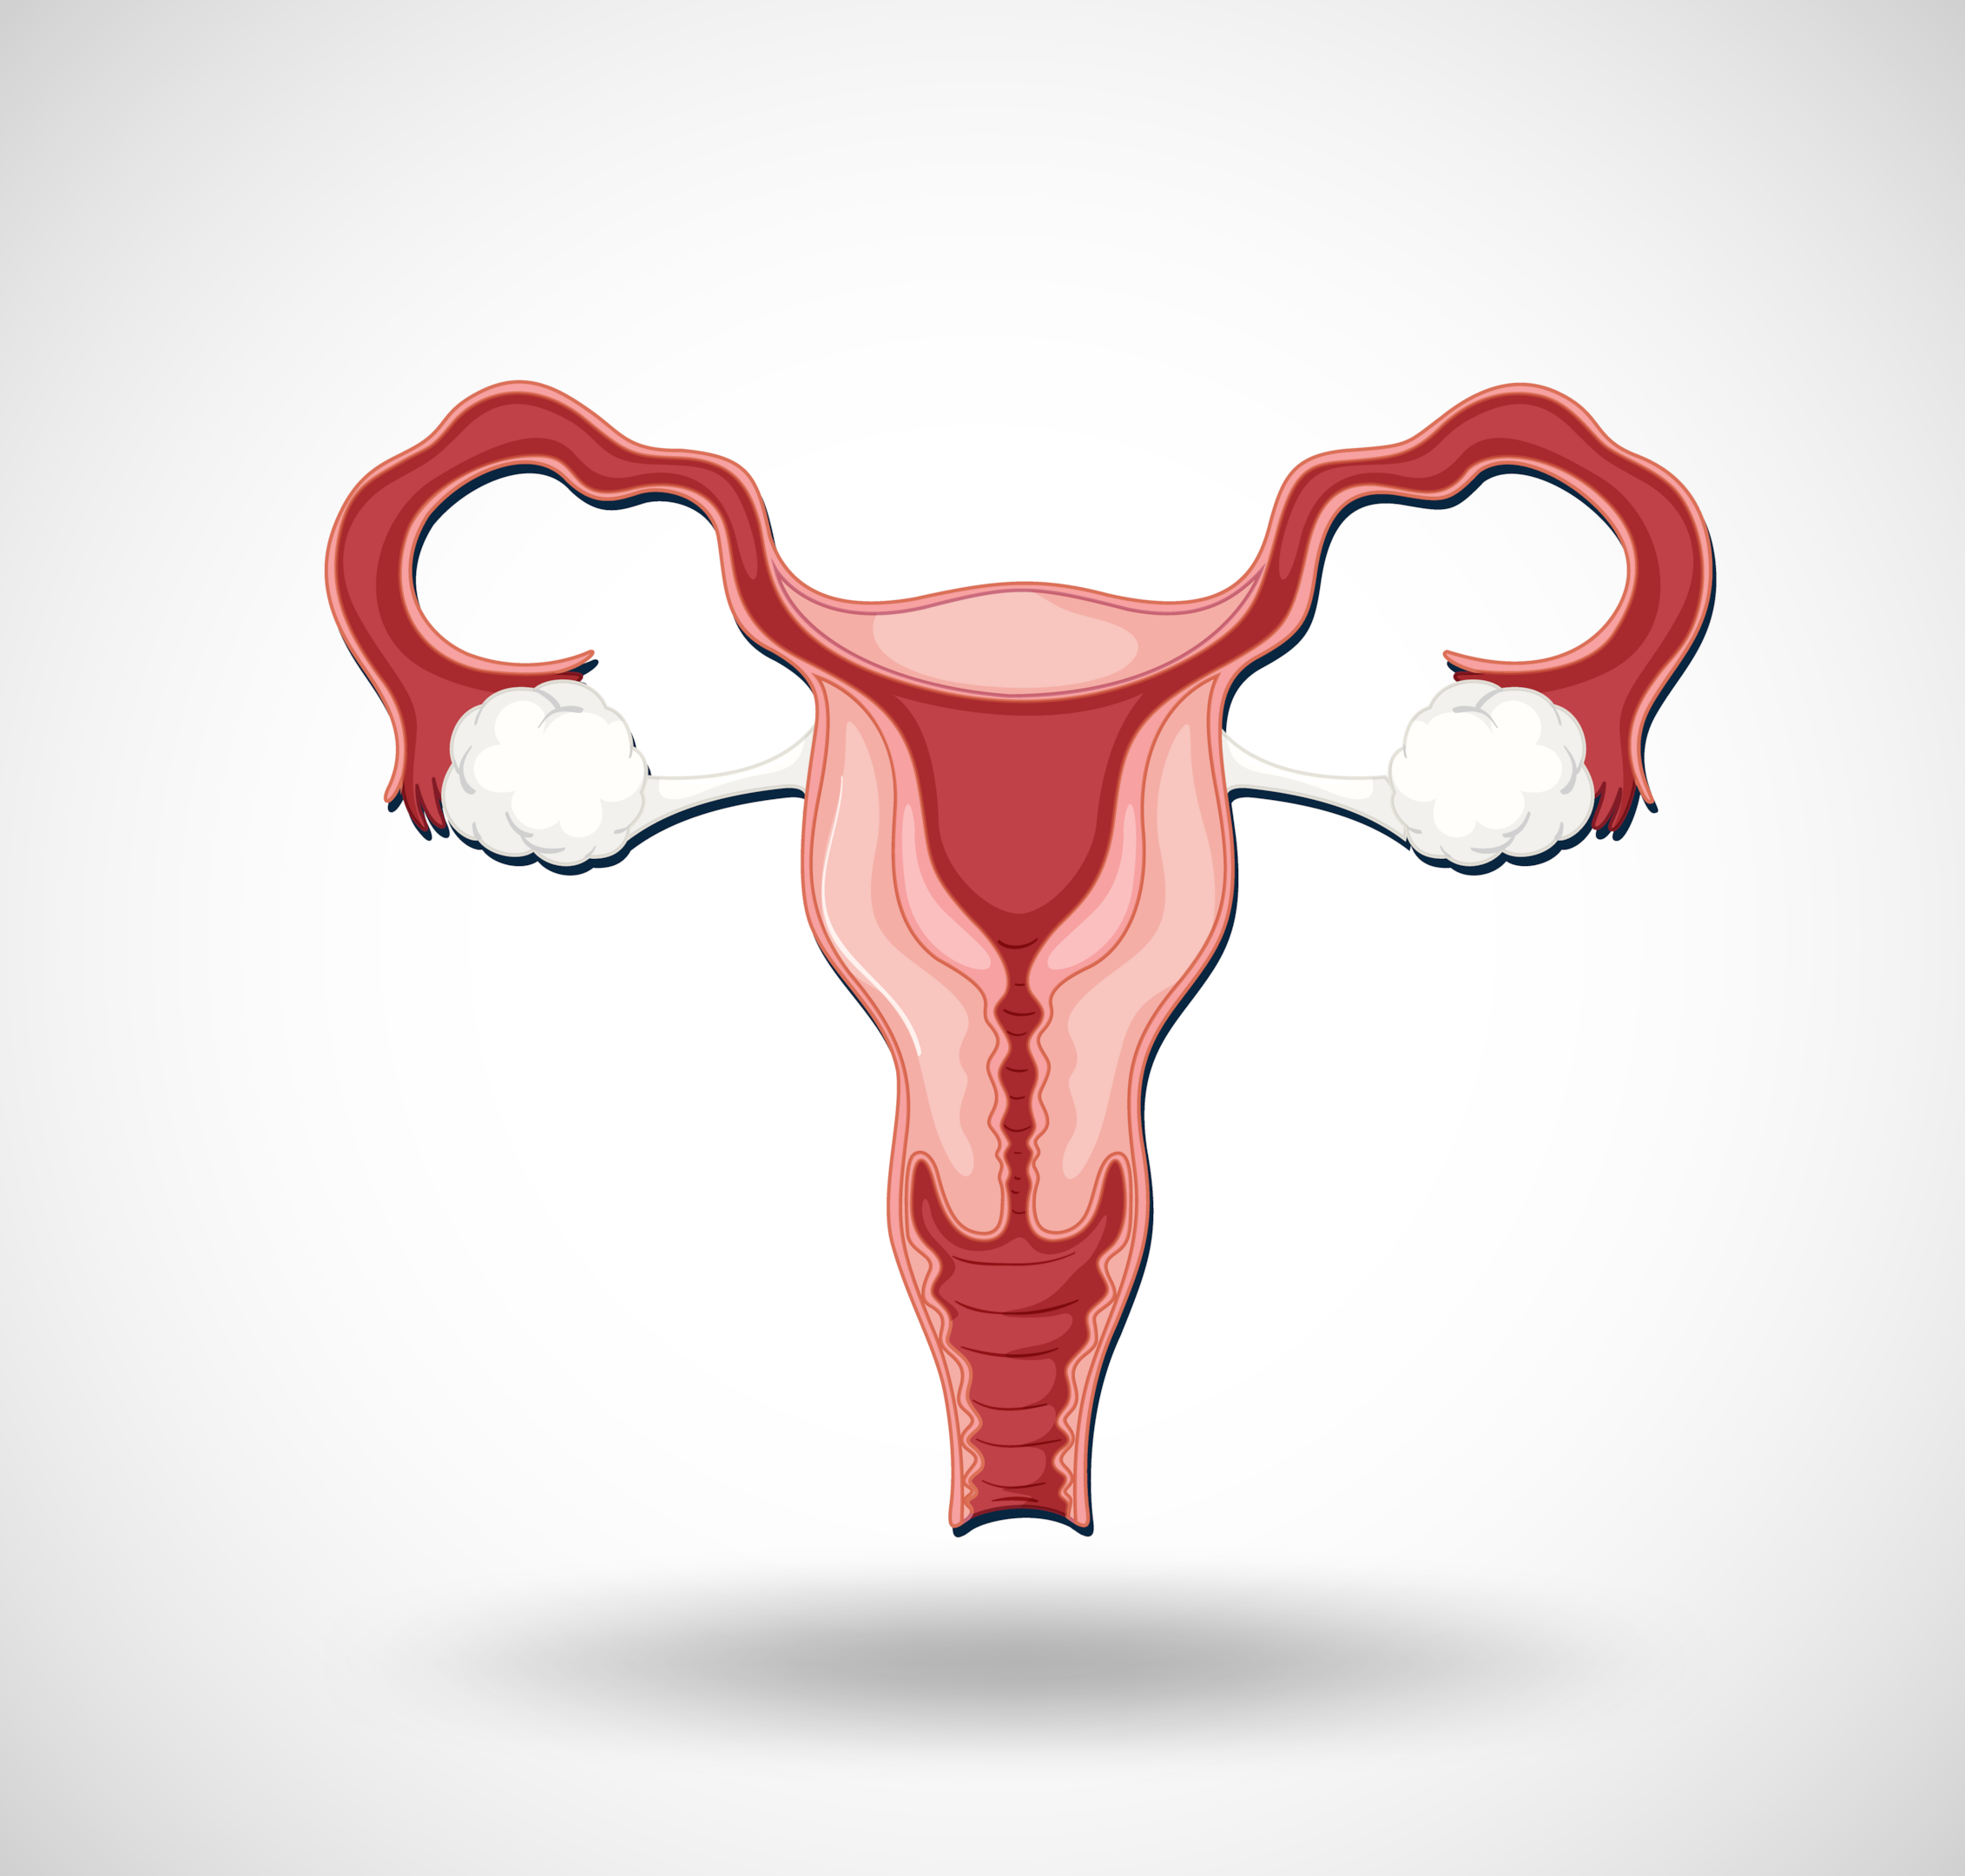 The cervix joins the body of the uterus with the vagina.